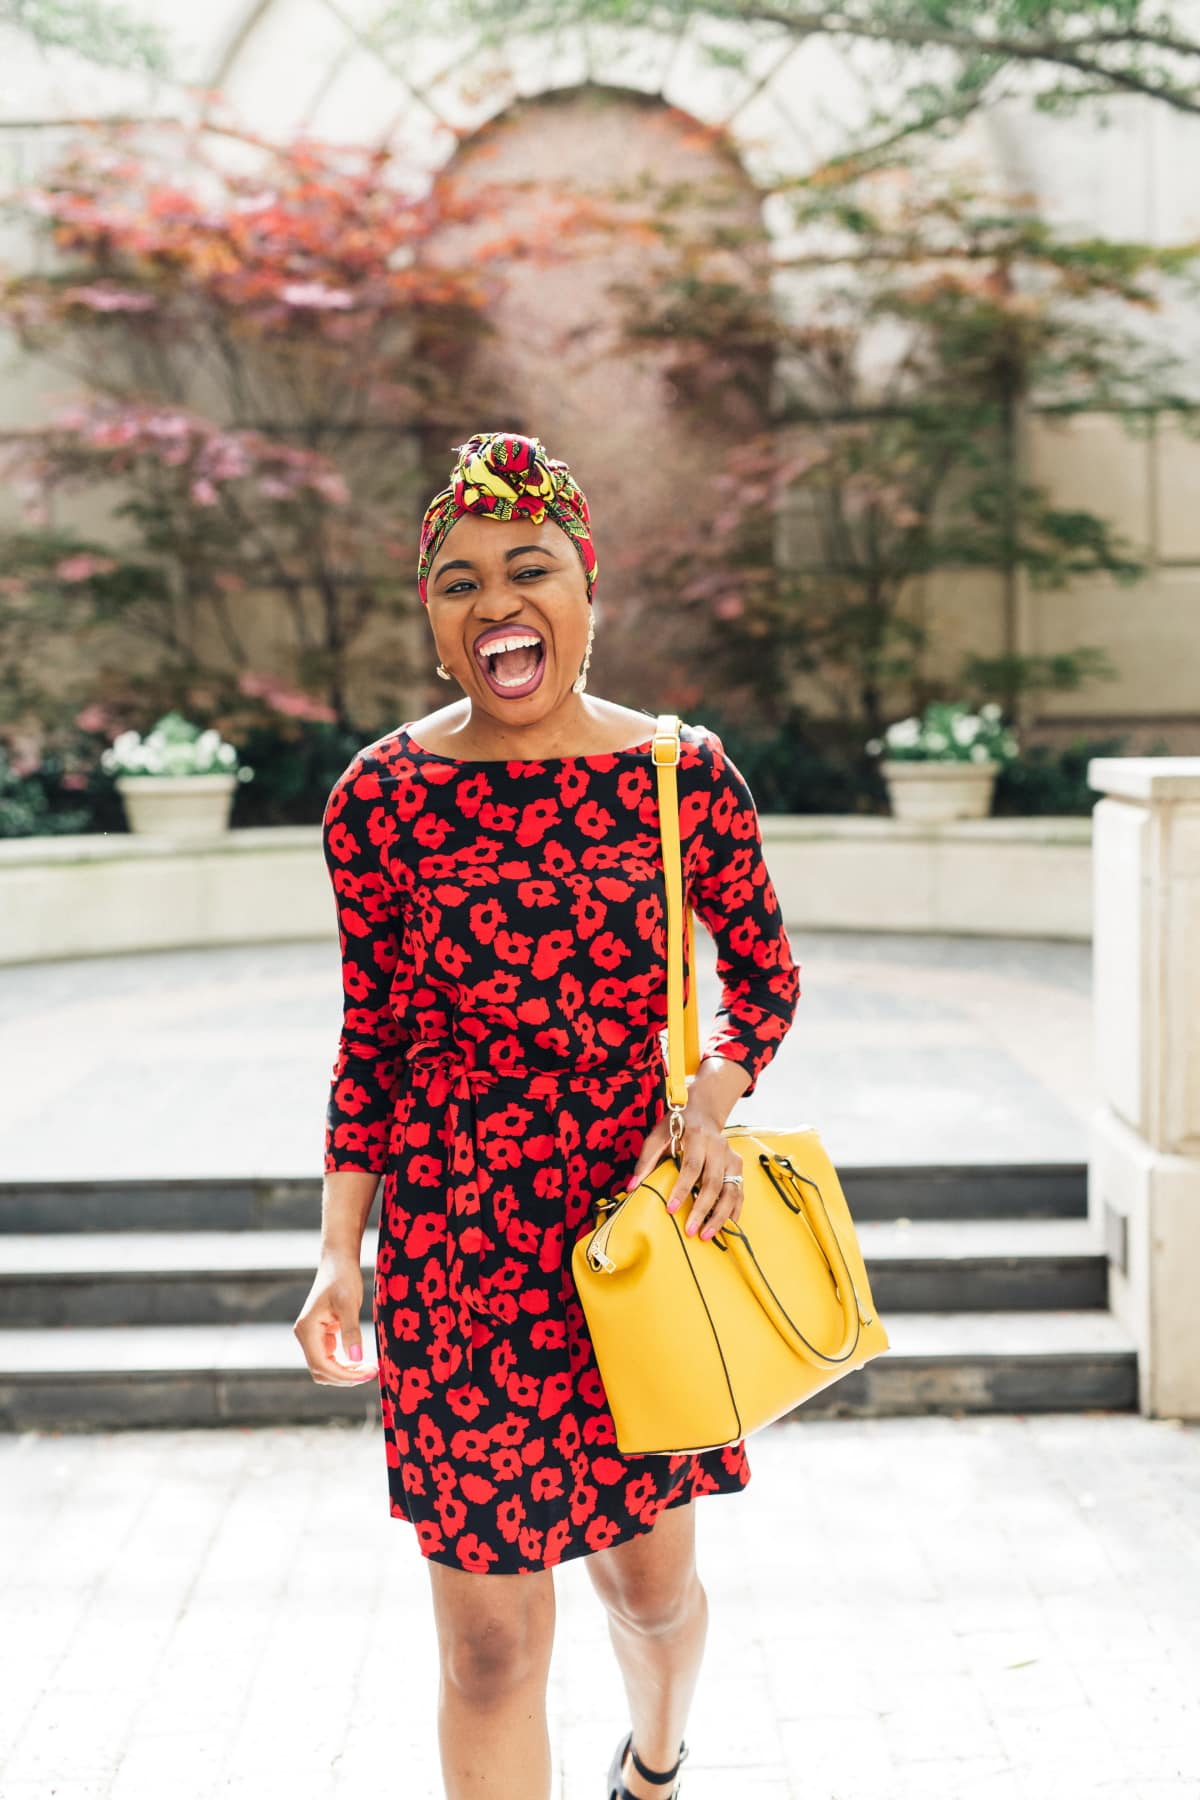 New Jersey fashion blogger shows us how A unique workwear look that embraces your culture. Easily transition this summer style from office wear to church outfit, date night, and casual everyday wear. #africantrends #springstyle #nigerianfashion #headpiece